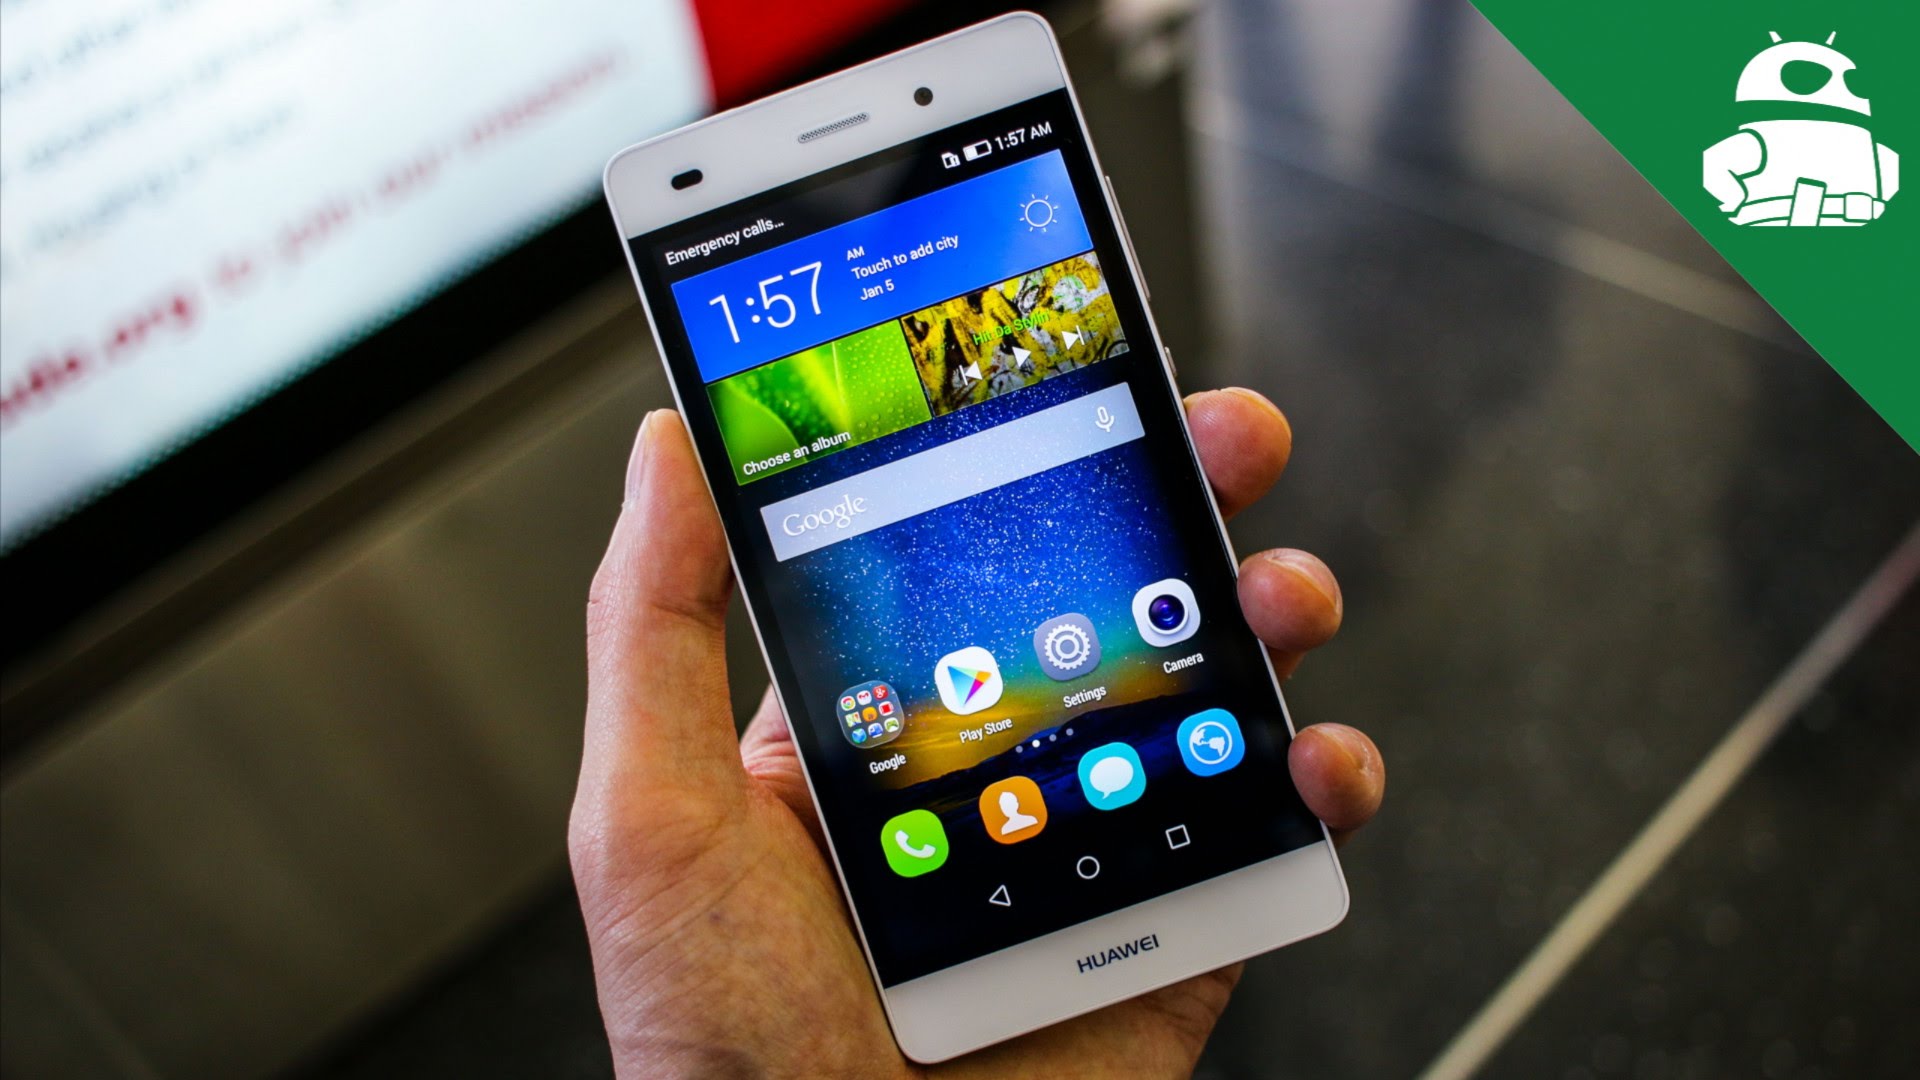 Trouwens toeter Birma HUAWEI P8 Lite Hands on and First Impressions